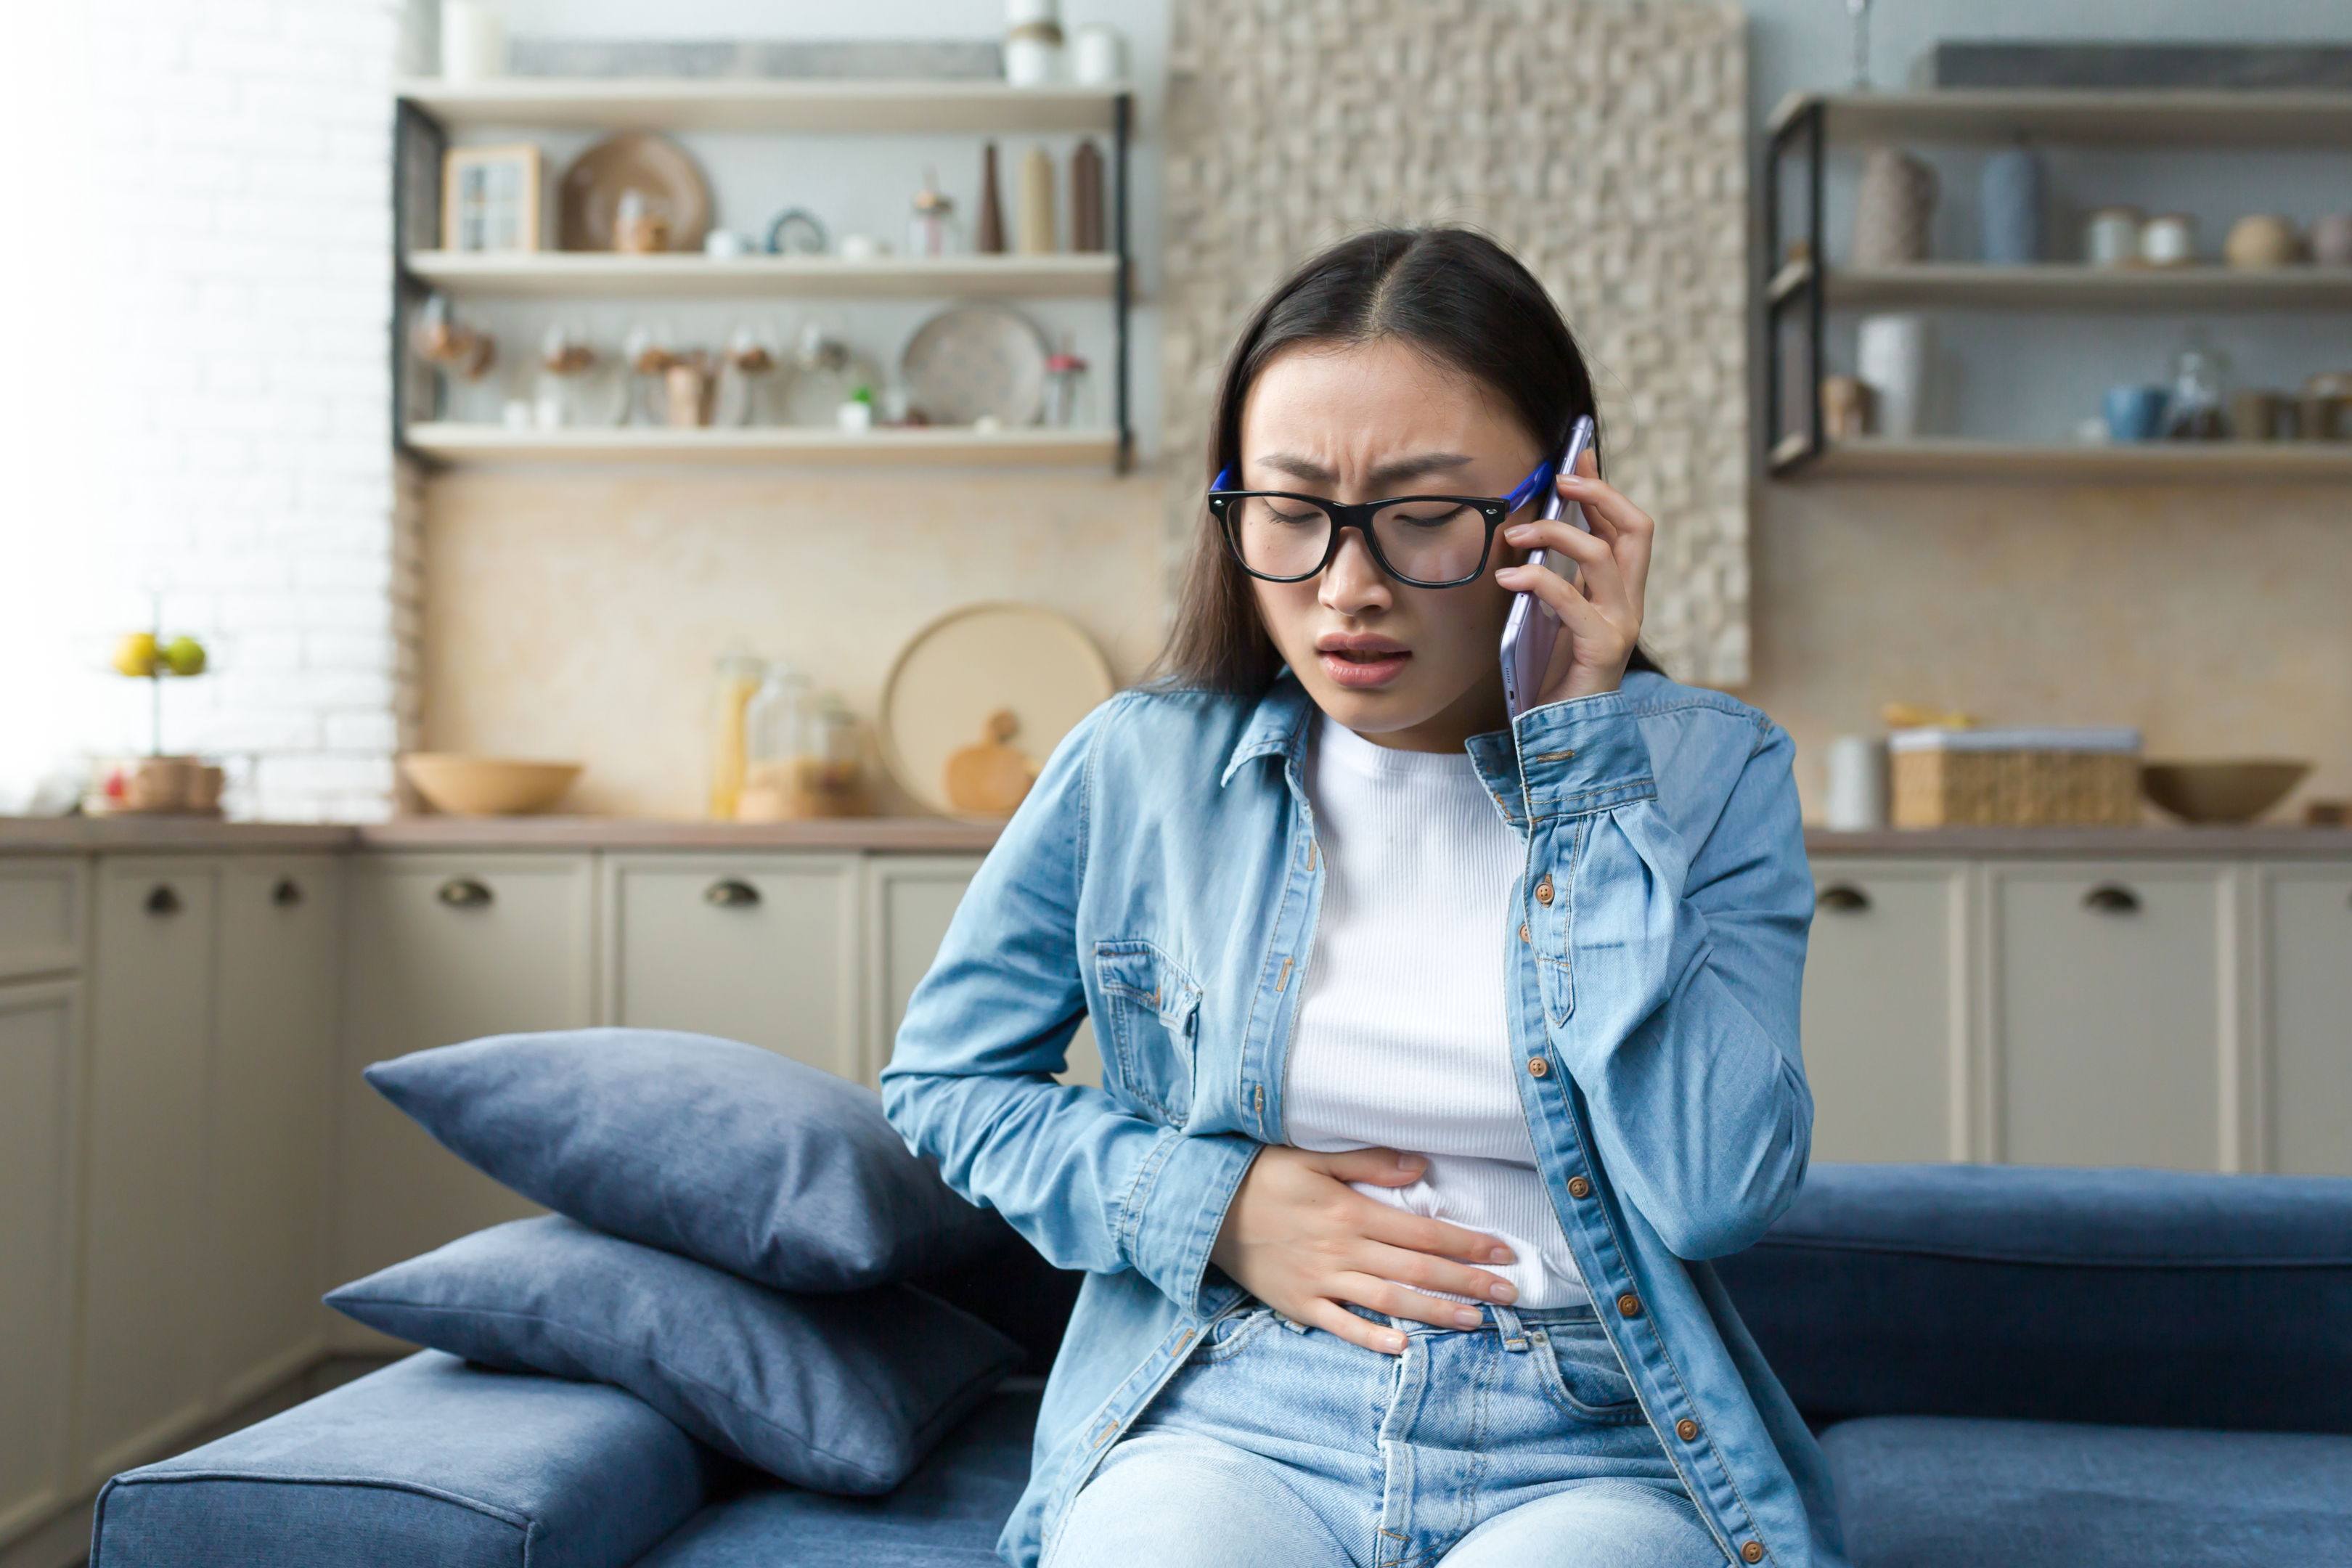 It can be confusing and scary when you have period pain but don't know when your period is coming. Many women have pelvic pain, which often feels like cramps, but it may not always be because they are having their period.